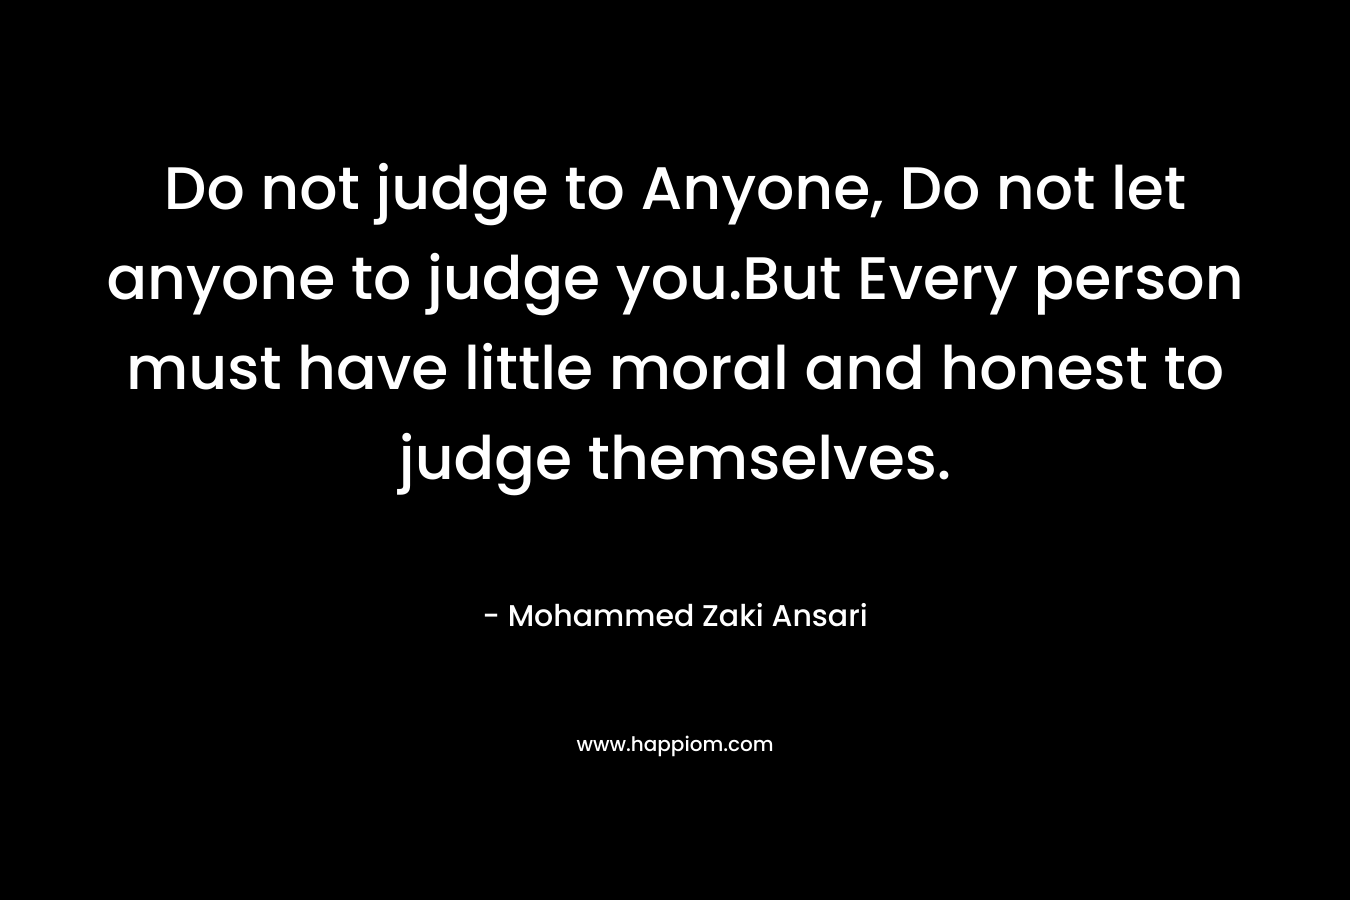 Do not judge to Anyone, Do not let anyone to judge you.But Every person must have little moral and honest to judge themselves.